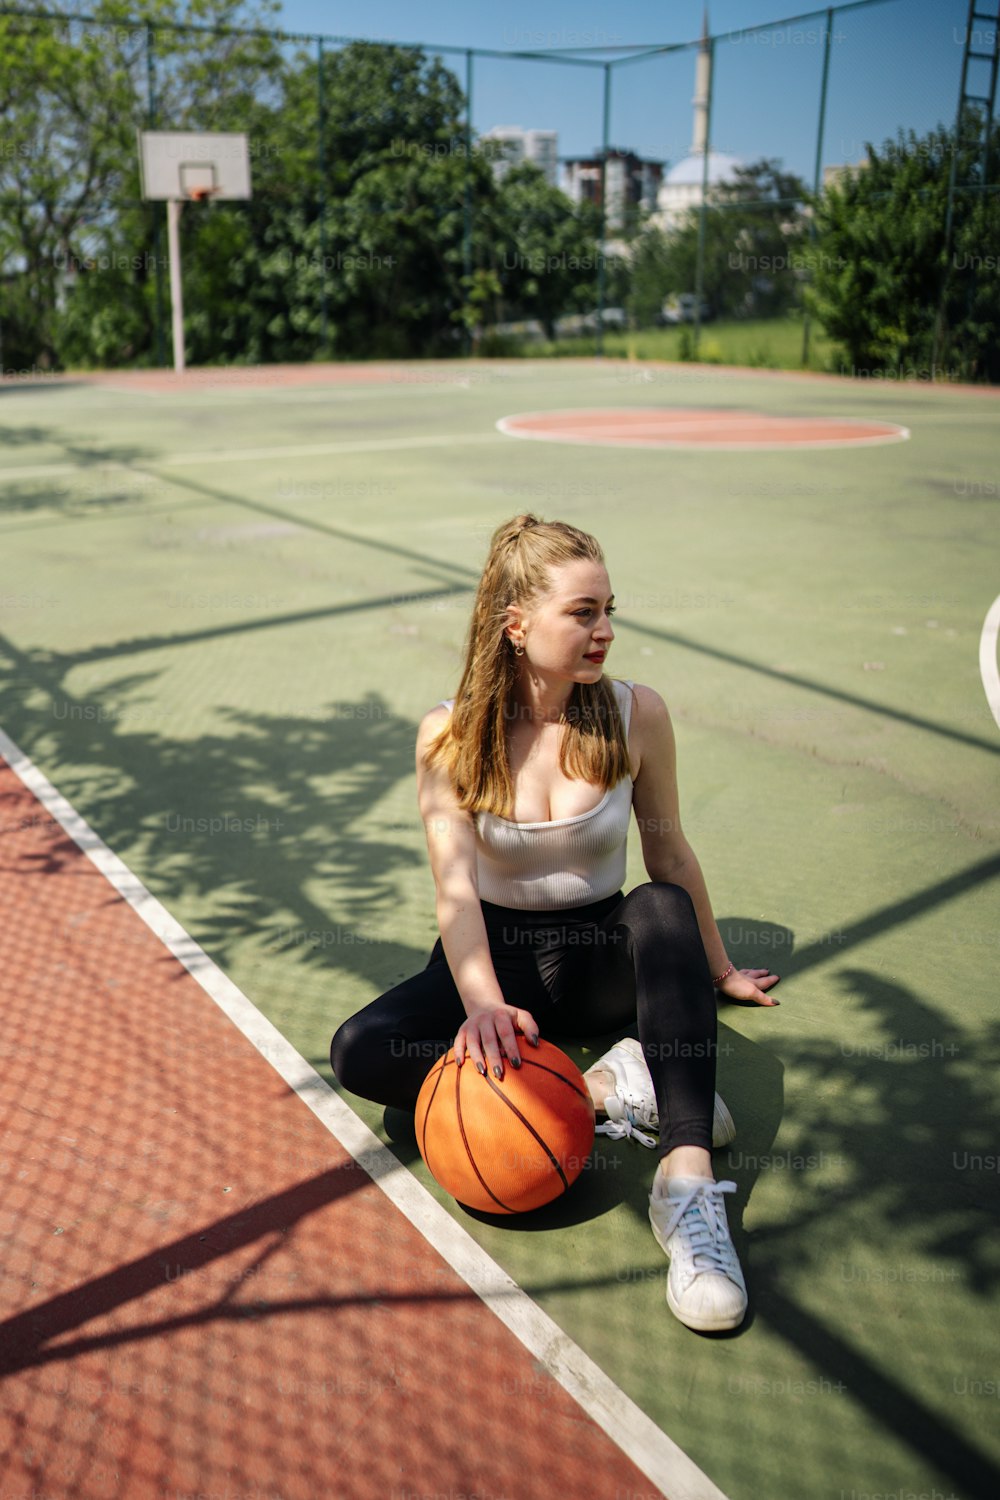 a woman sitting on the ground with a basketball